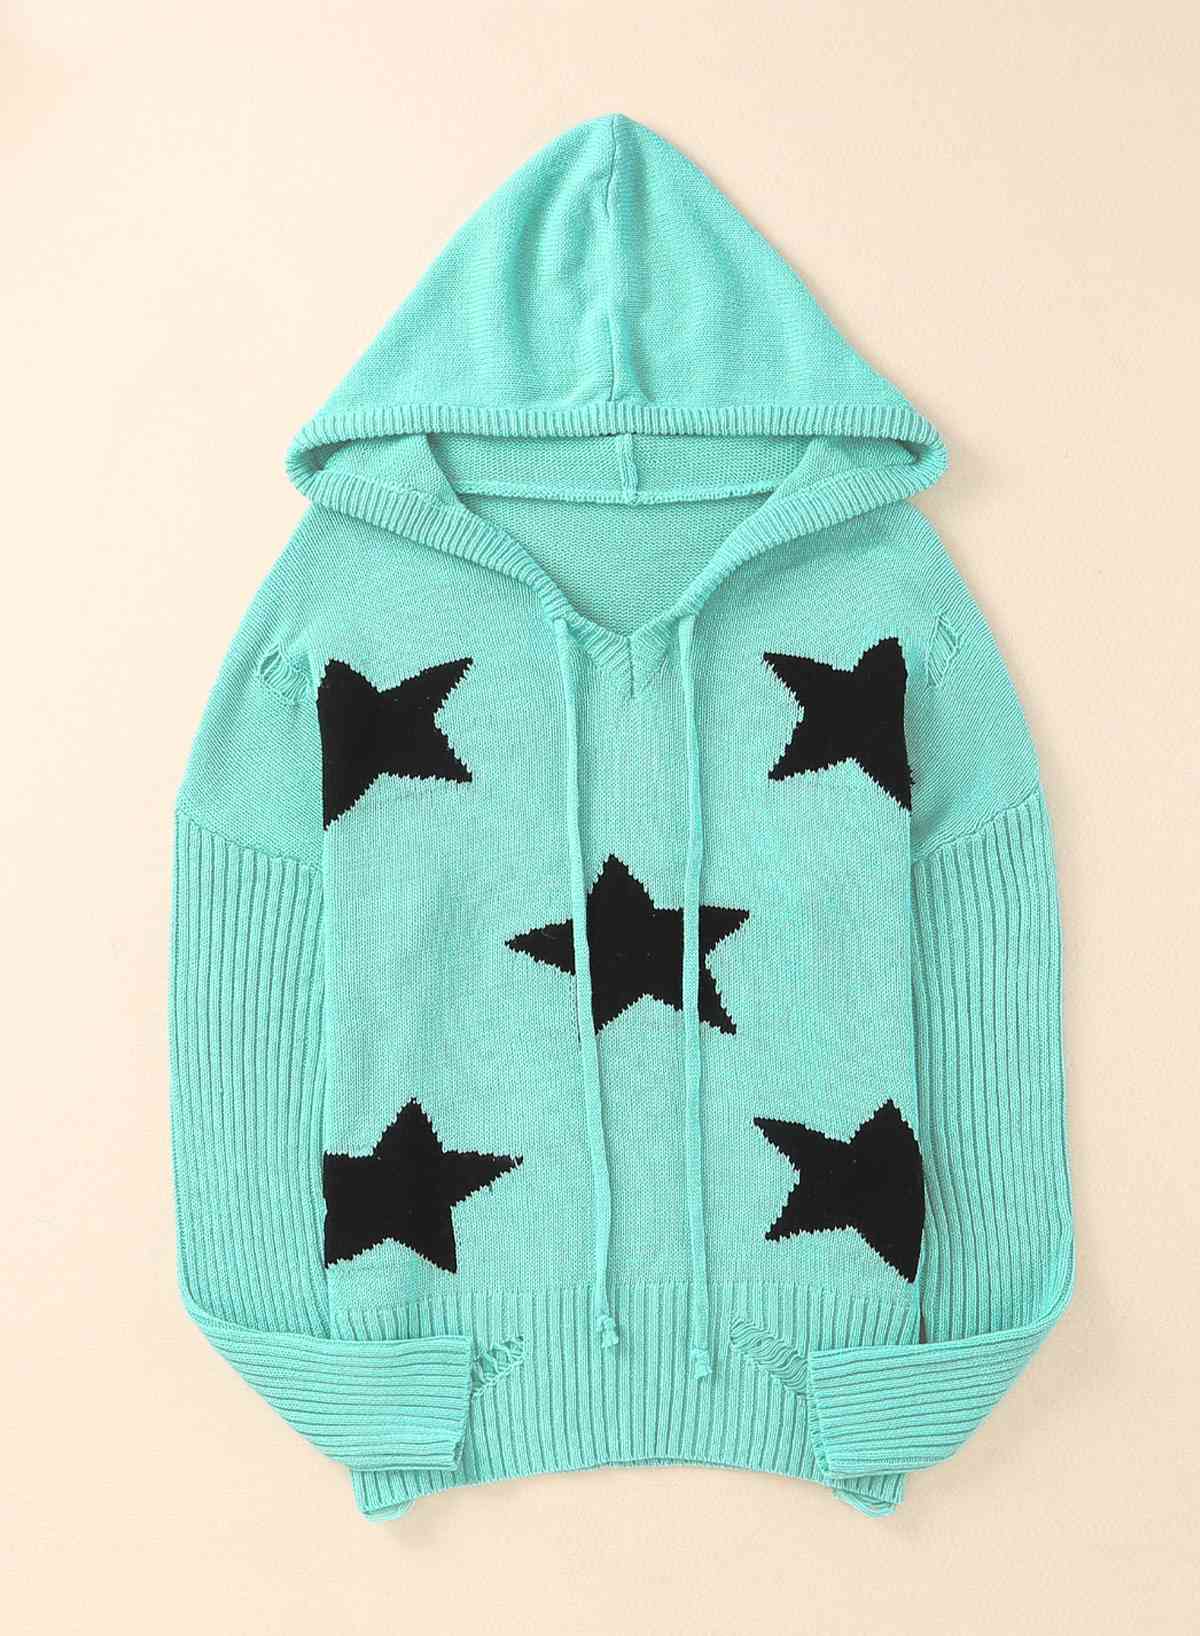 Woven Right Star Distressed Slit Hooded Sweater